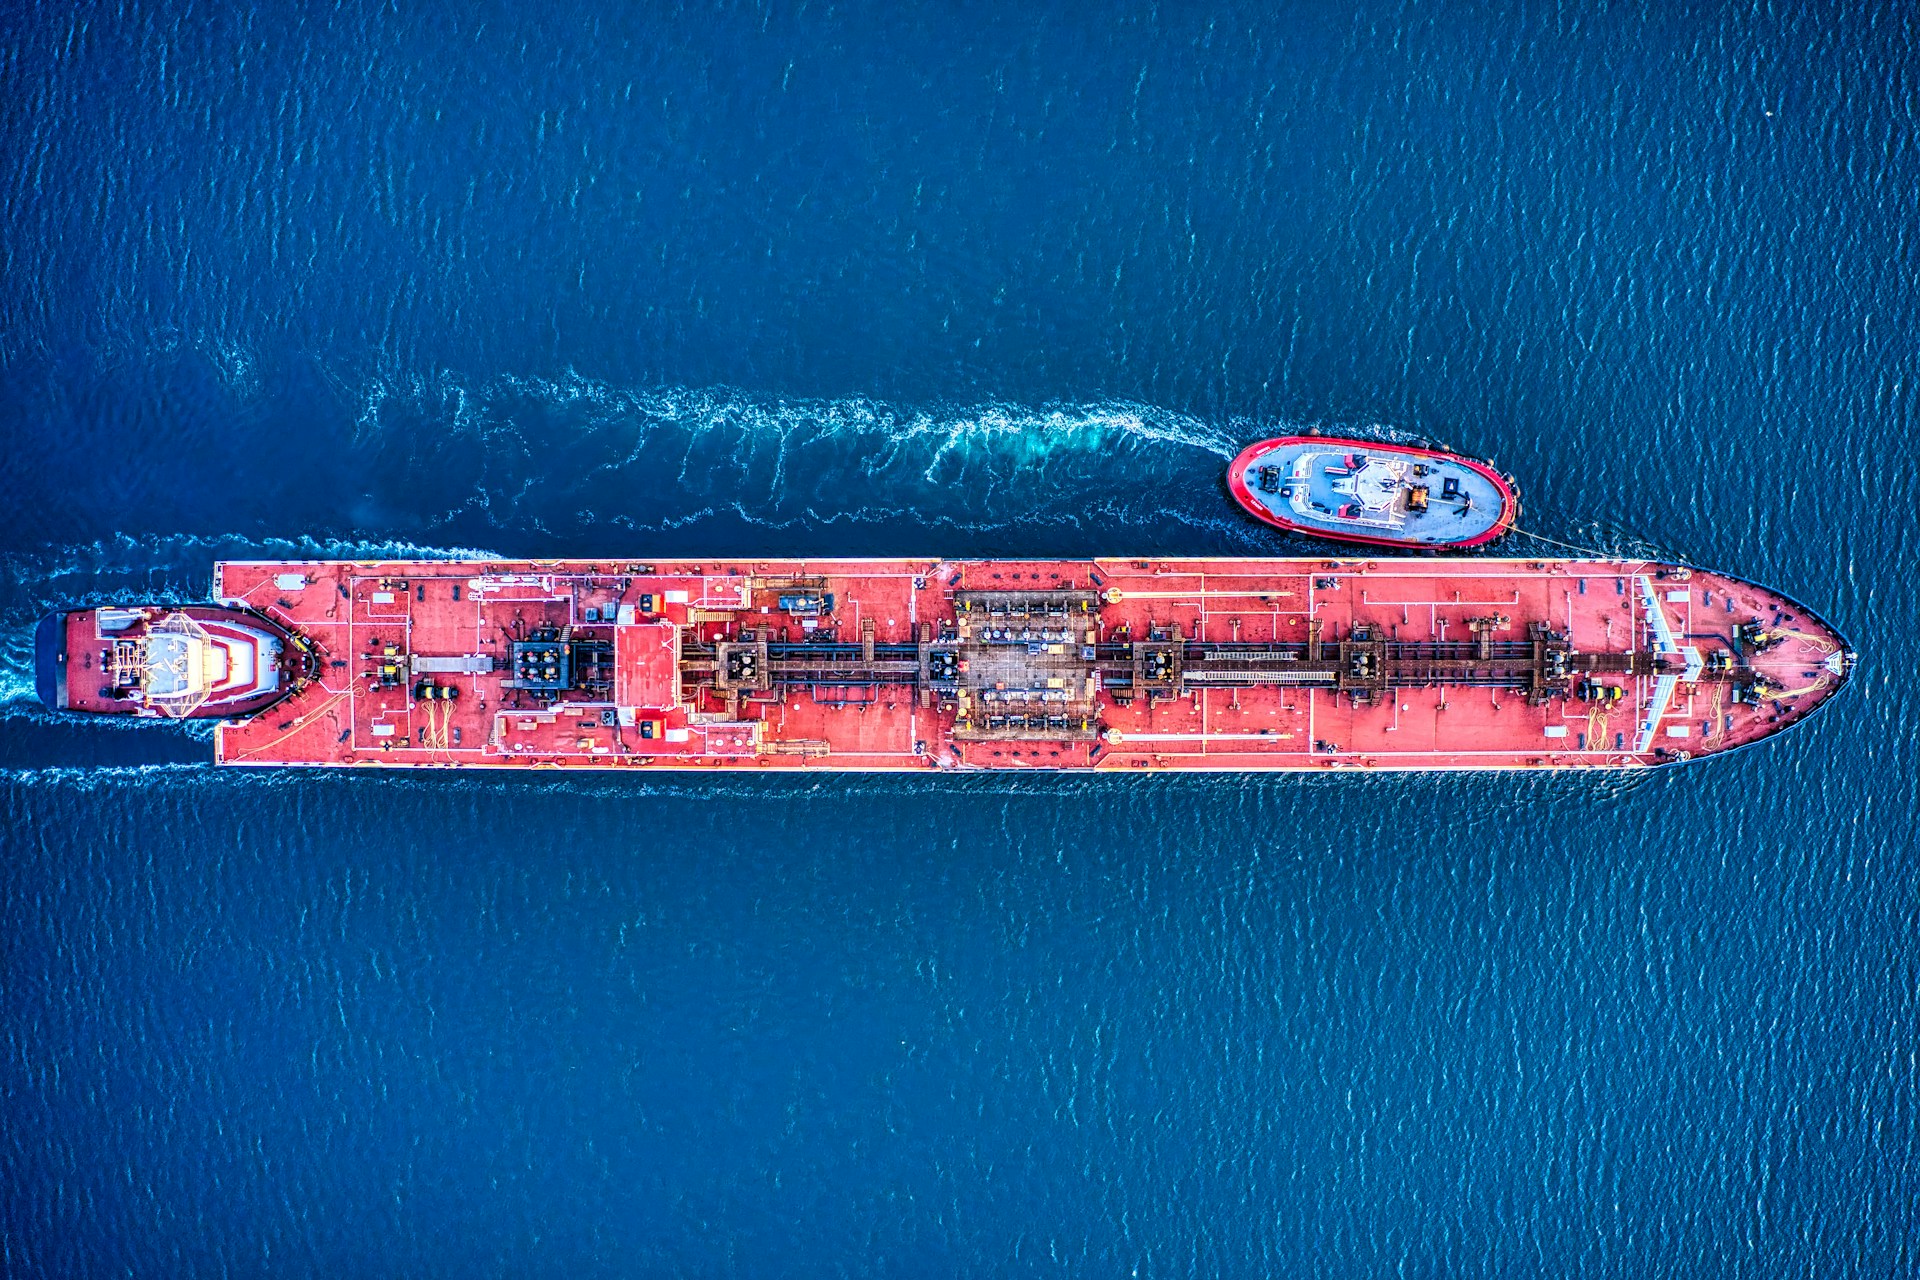 Aerial view of a large oil tanker and tugbpat